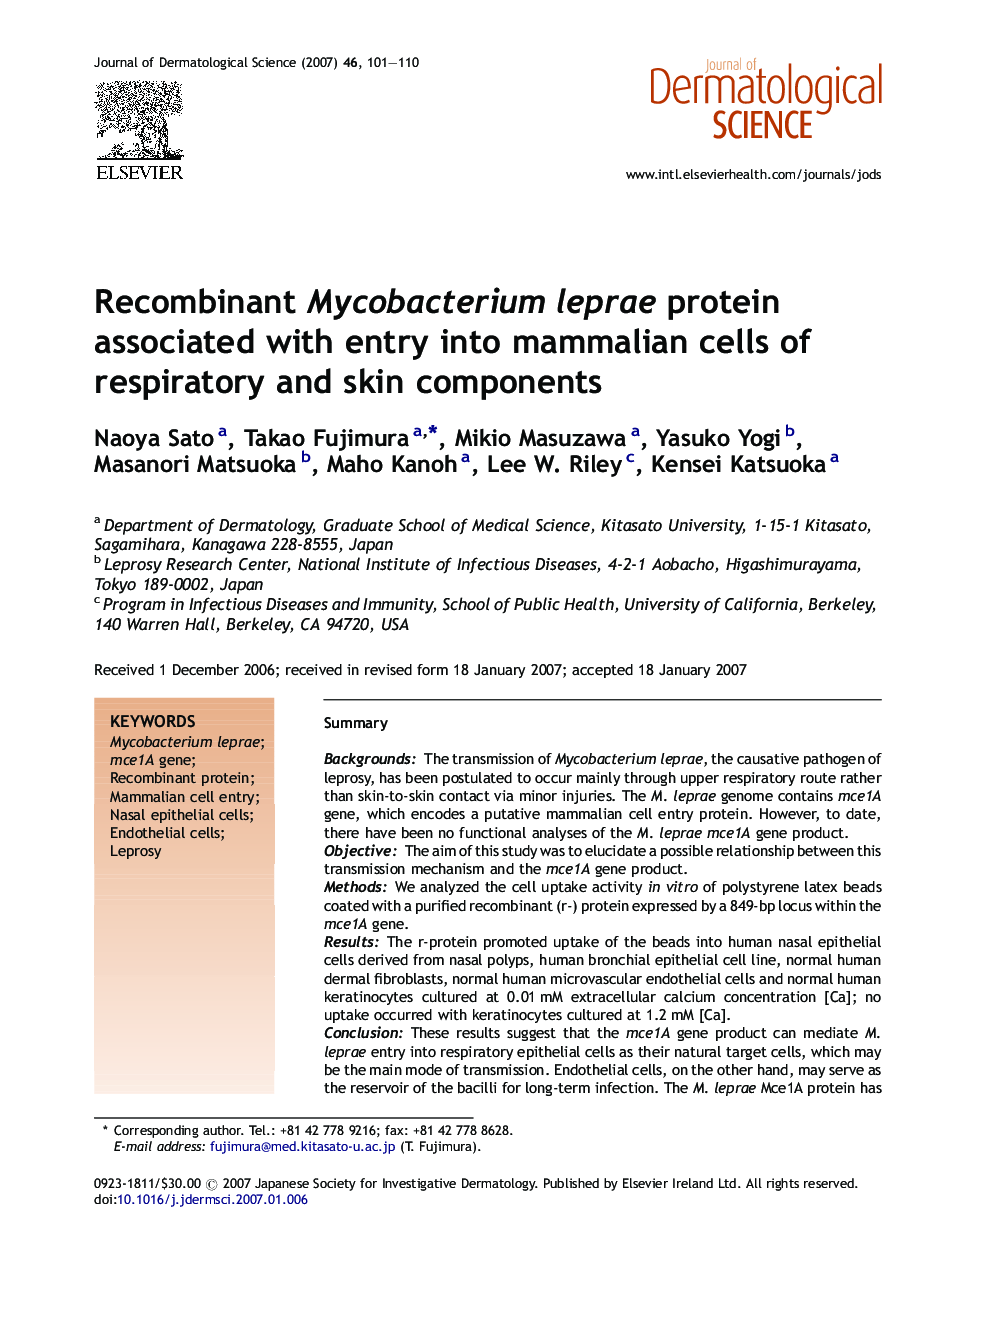 Recombinant Mycobacterium leprae protein associated with entry into mammalian cells of respiratory and skin components